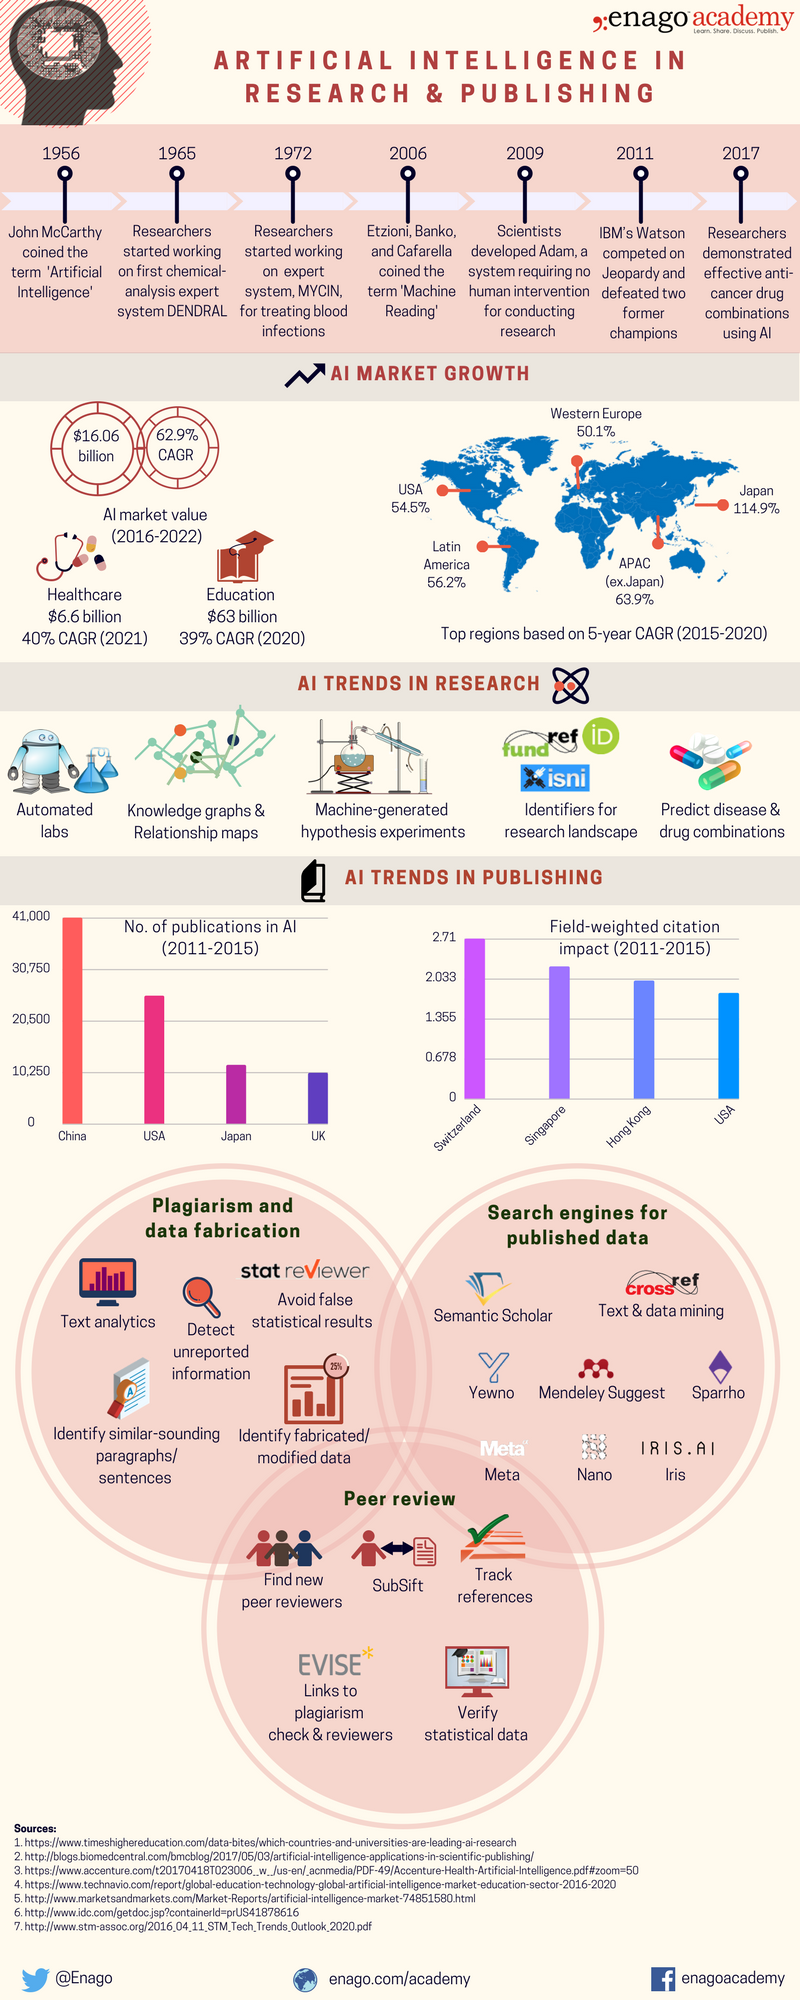 Artificial-Intelligence-in-publishing-research-infographic-plaza